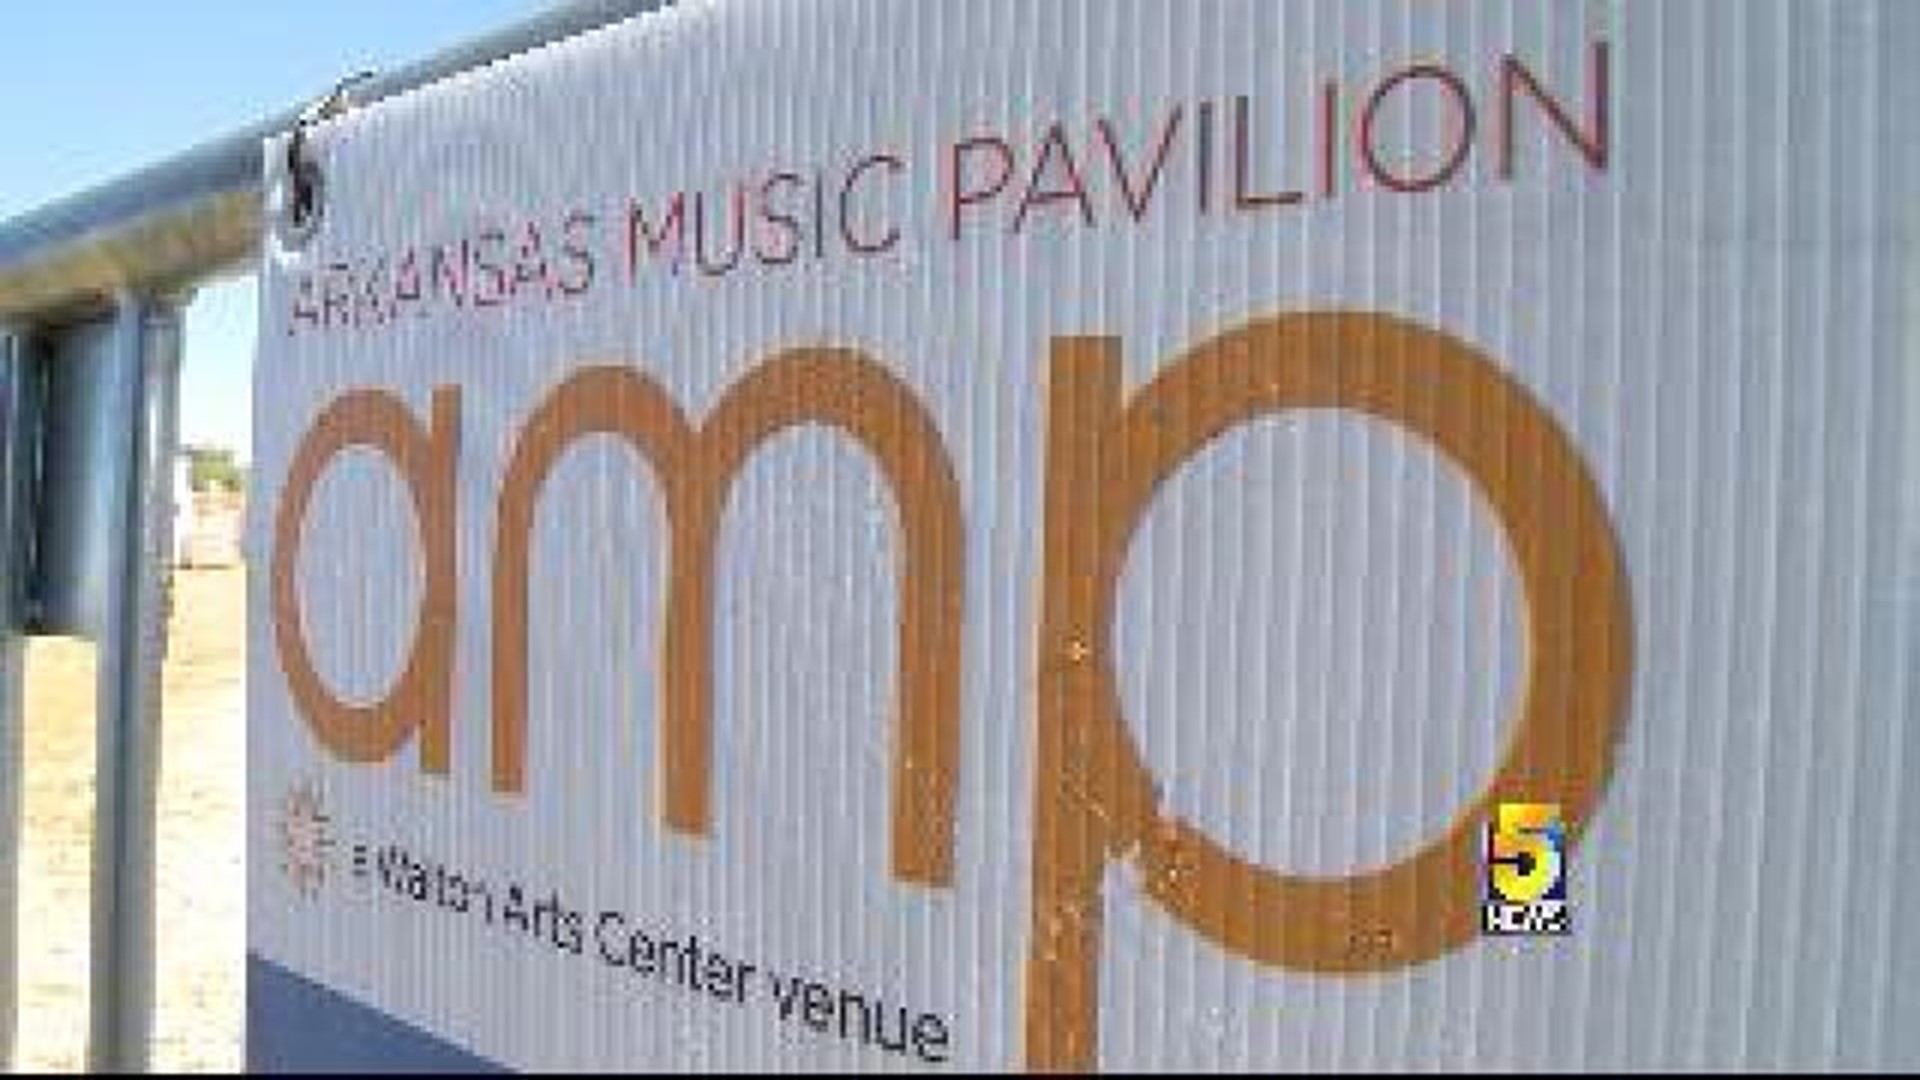 AMP is Moving to Pinnacle Hills Area